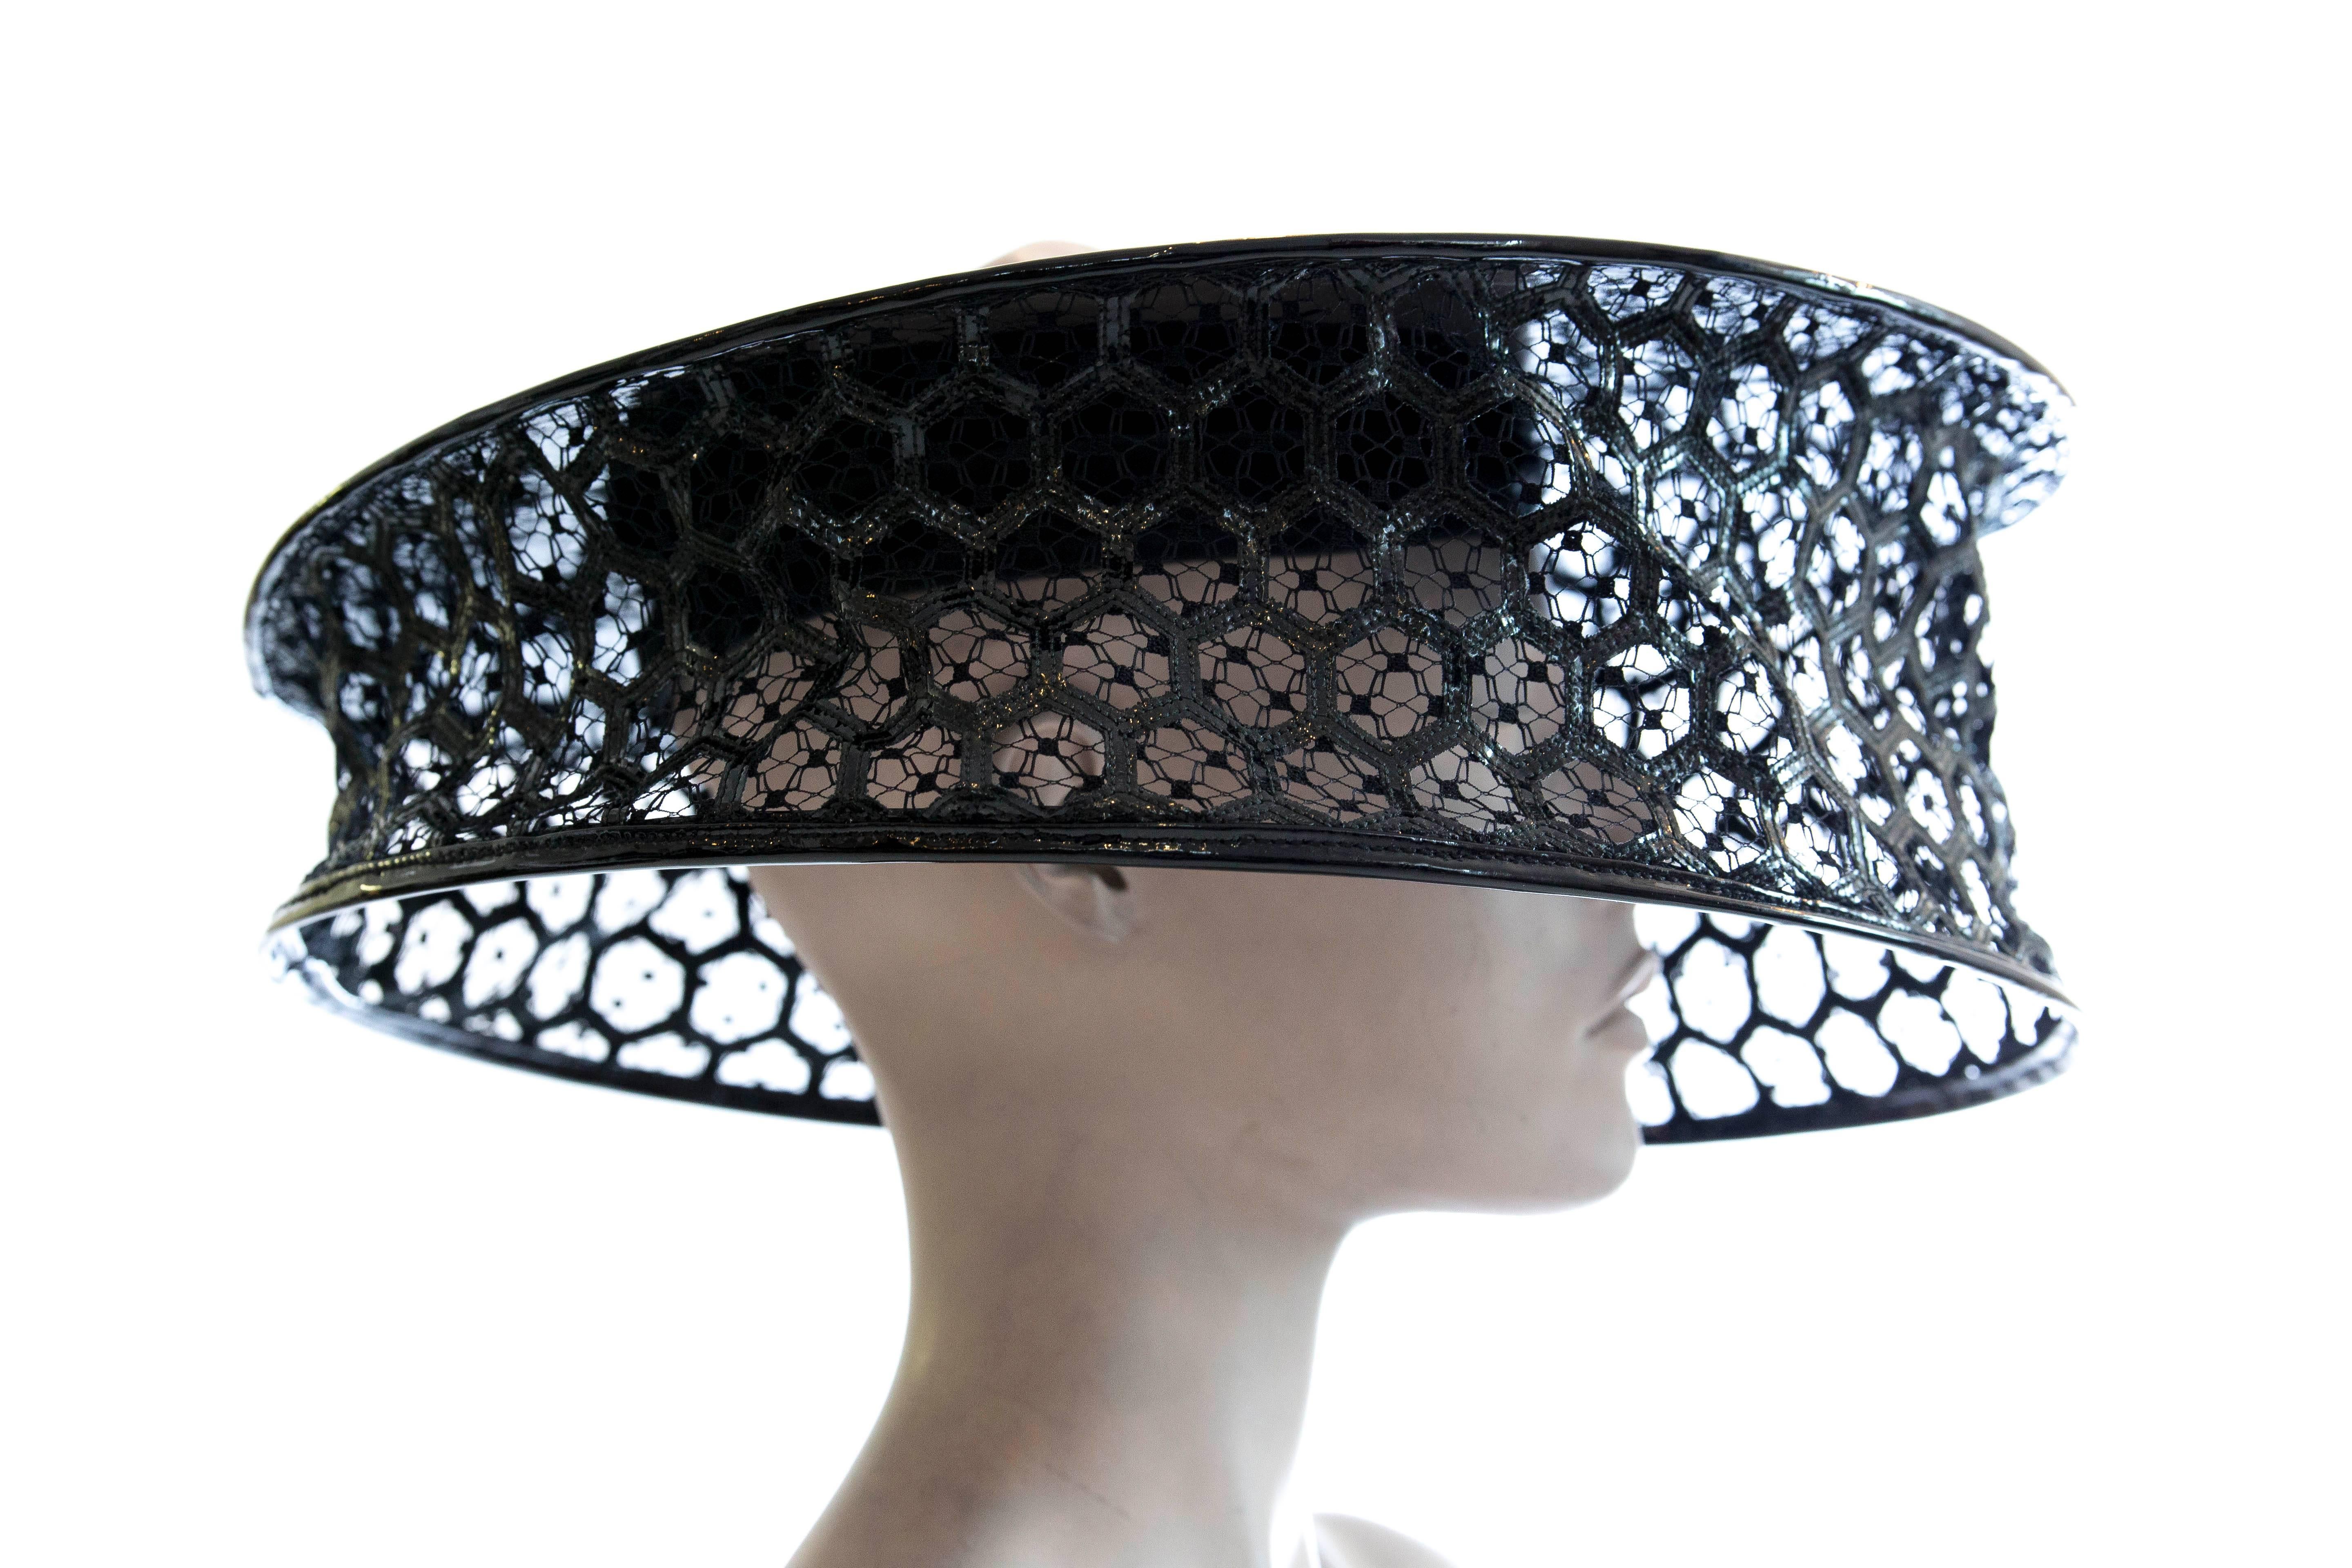 Alexander McQueen, Spring 2013, collapsible black patent leather Honeycomb hat with topless feature and tonal stitching throughout.

Circumference 14